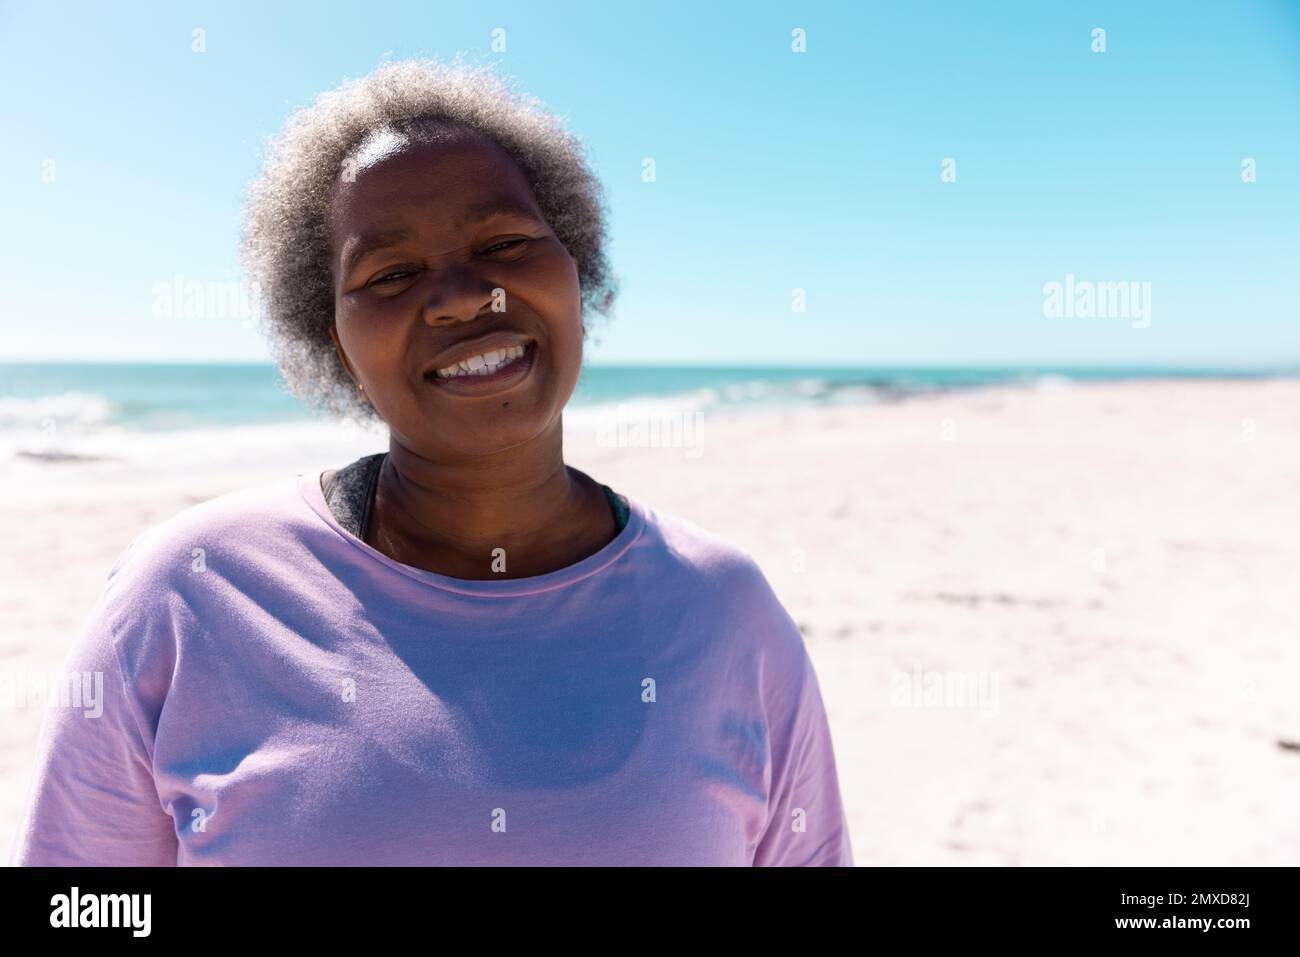 Smiling african american senior woman with short gray hair standing on beach against sea and sky Stock Photo